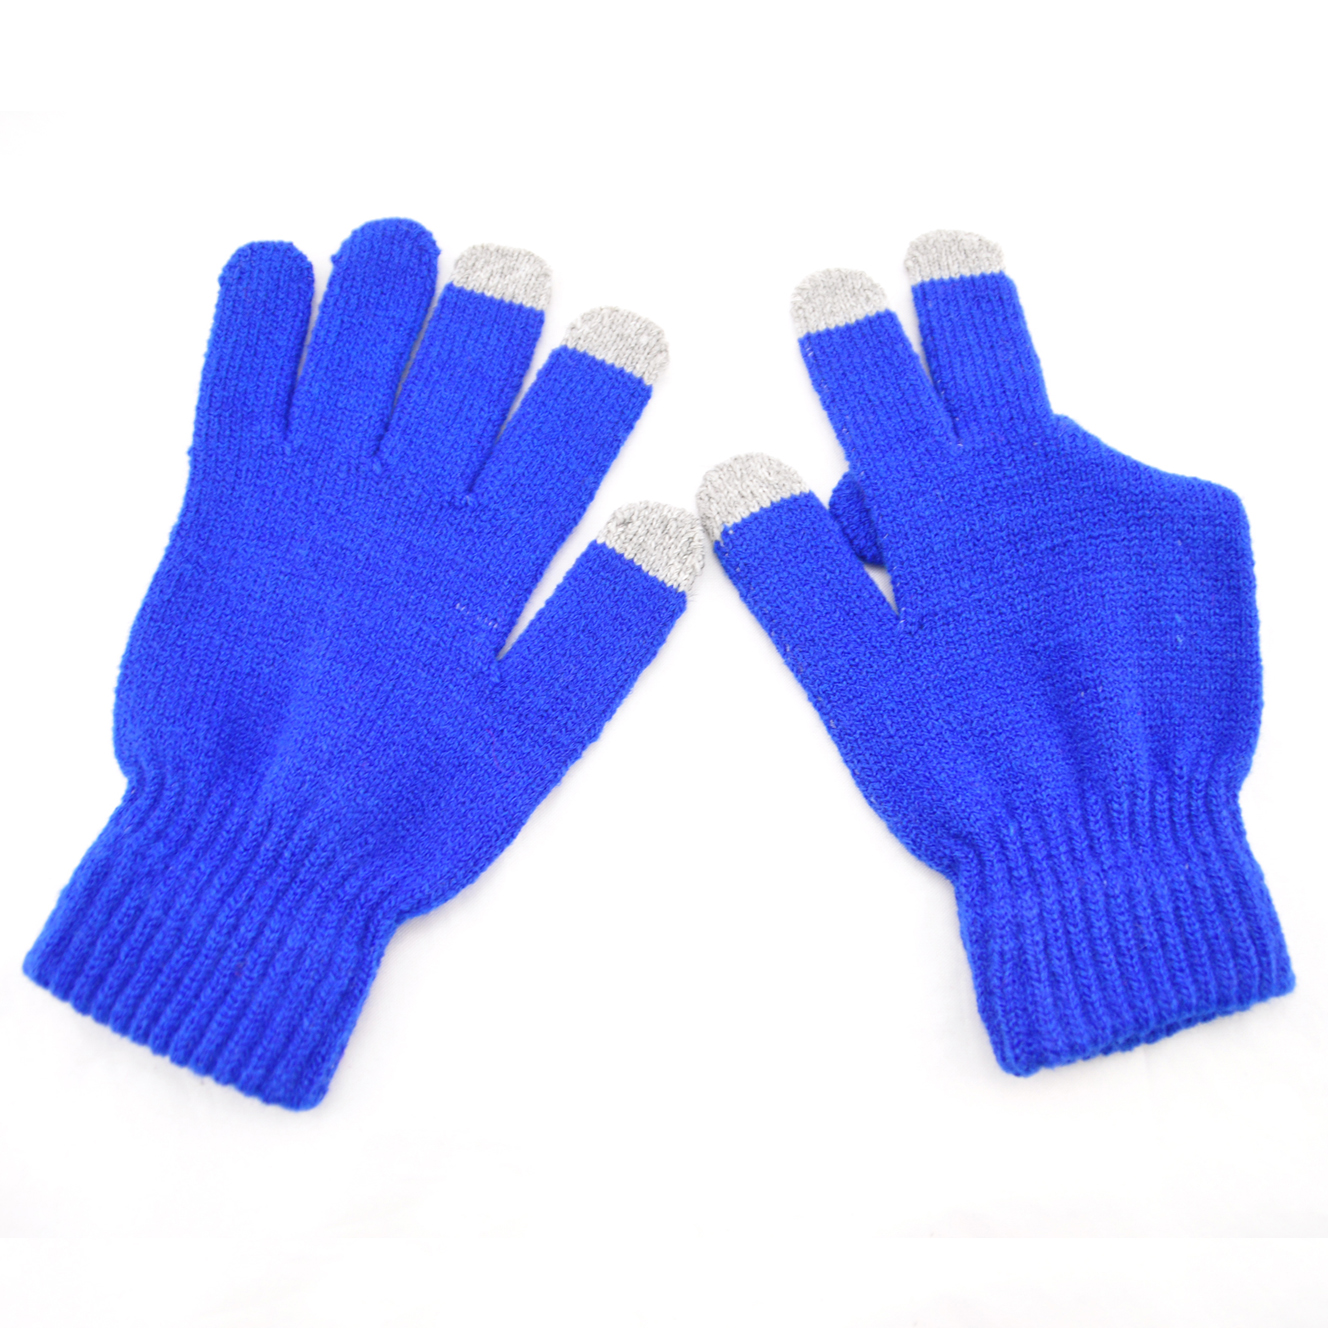 Touch screen glove ,Home Textile Products